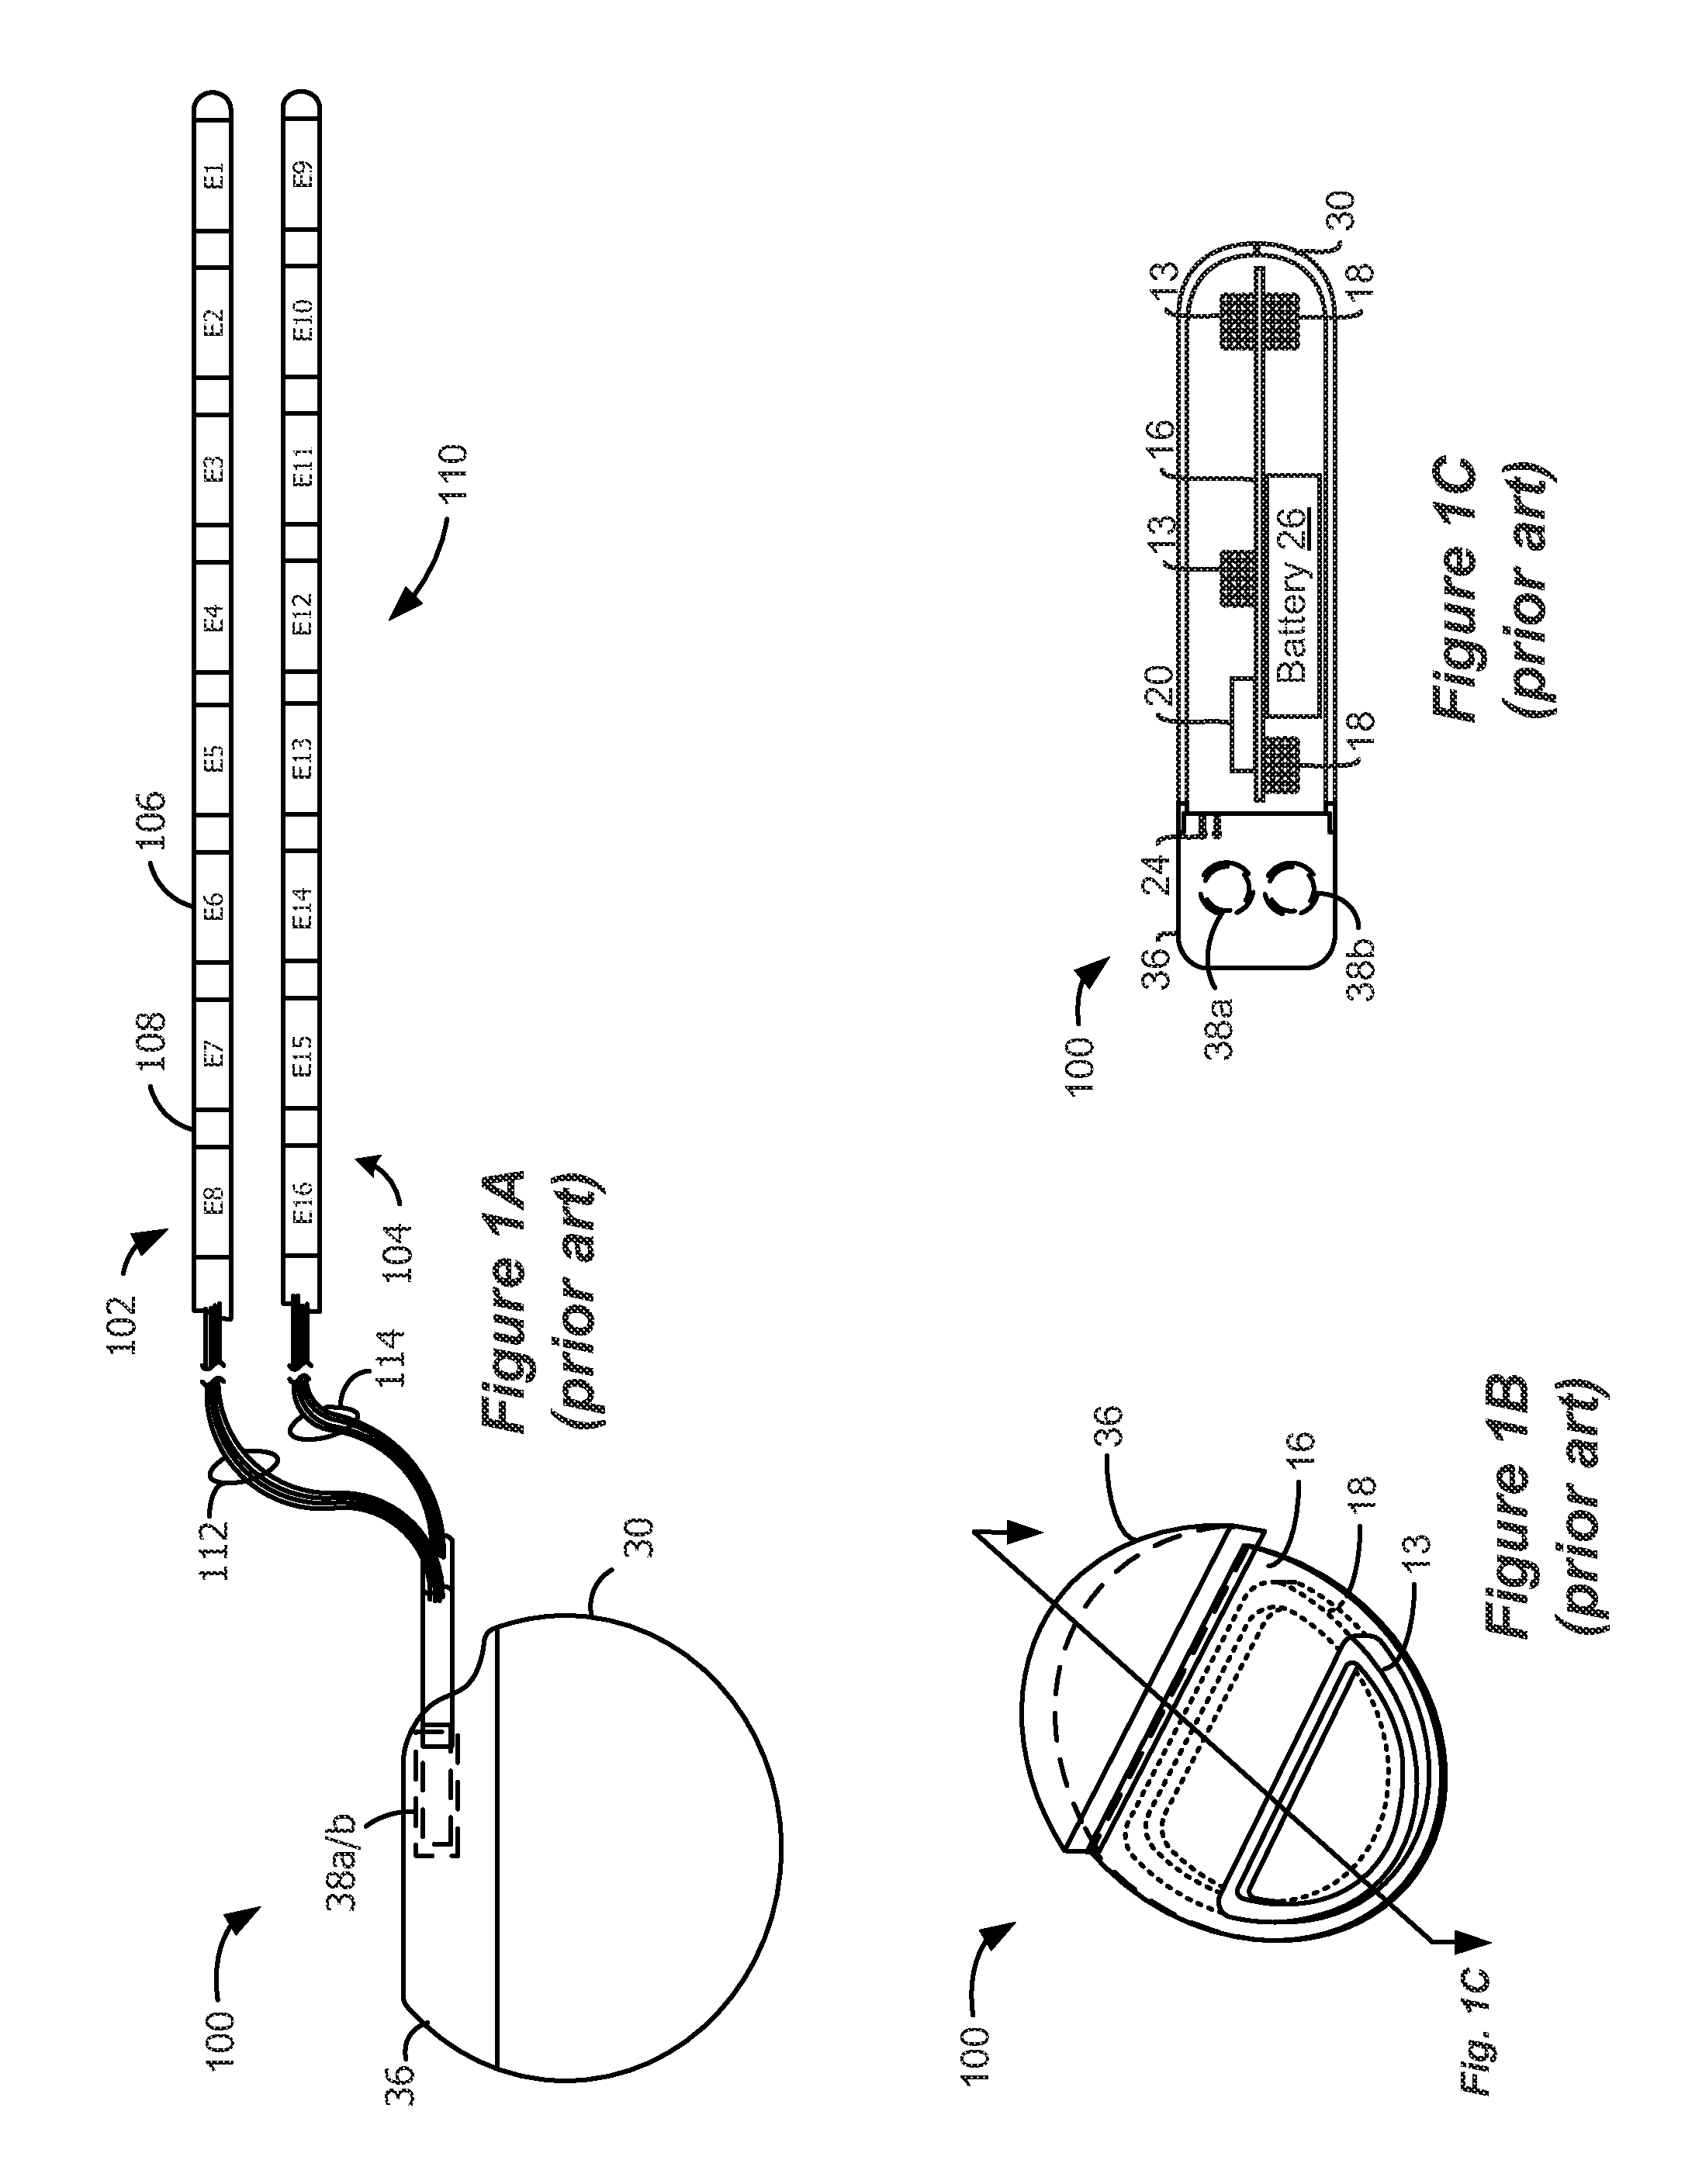 Charger Alignment in an Implantable Medical Device System Employing Reflected Impedance Modulation